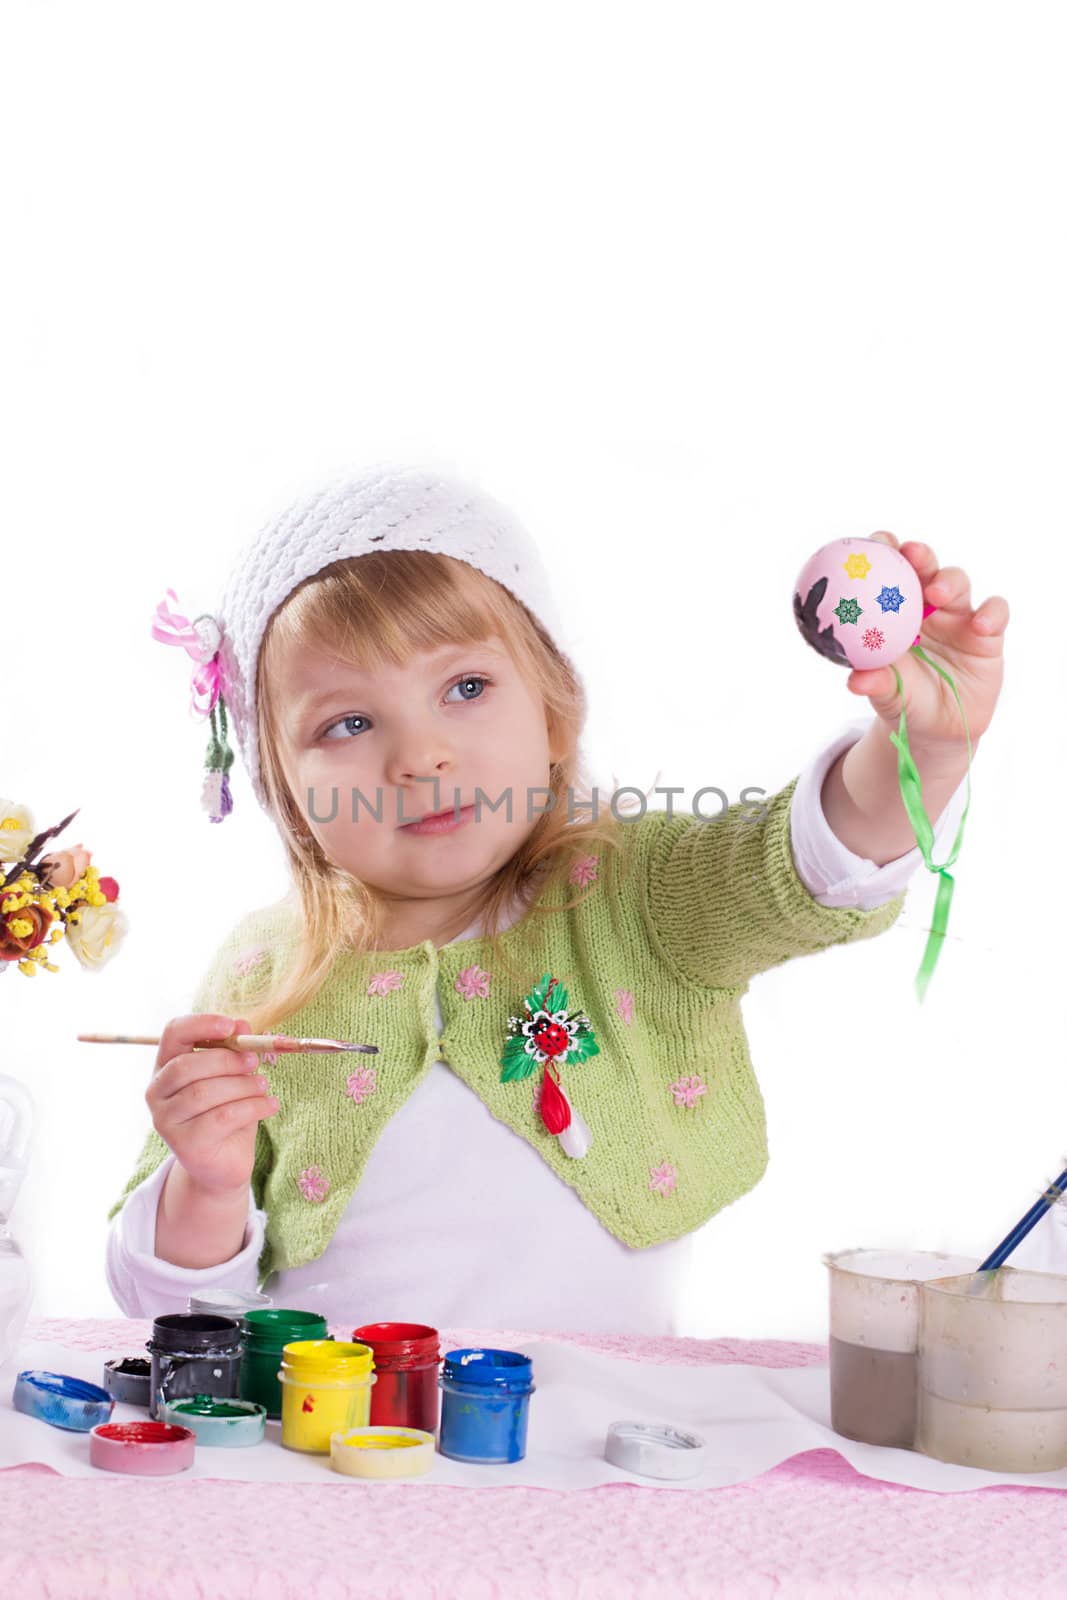 Little girl decorating easter eggs by Angel_a